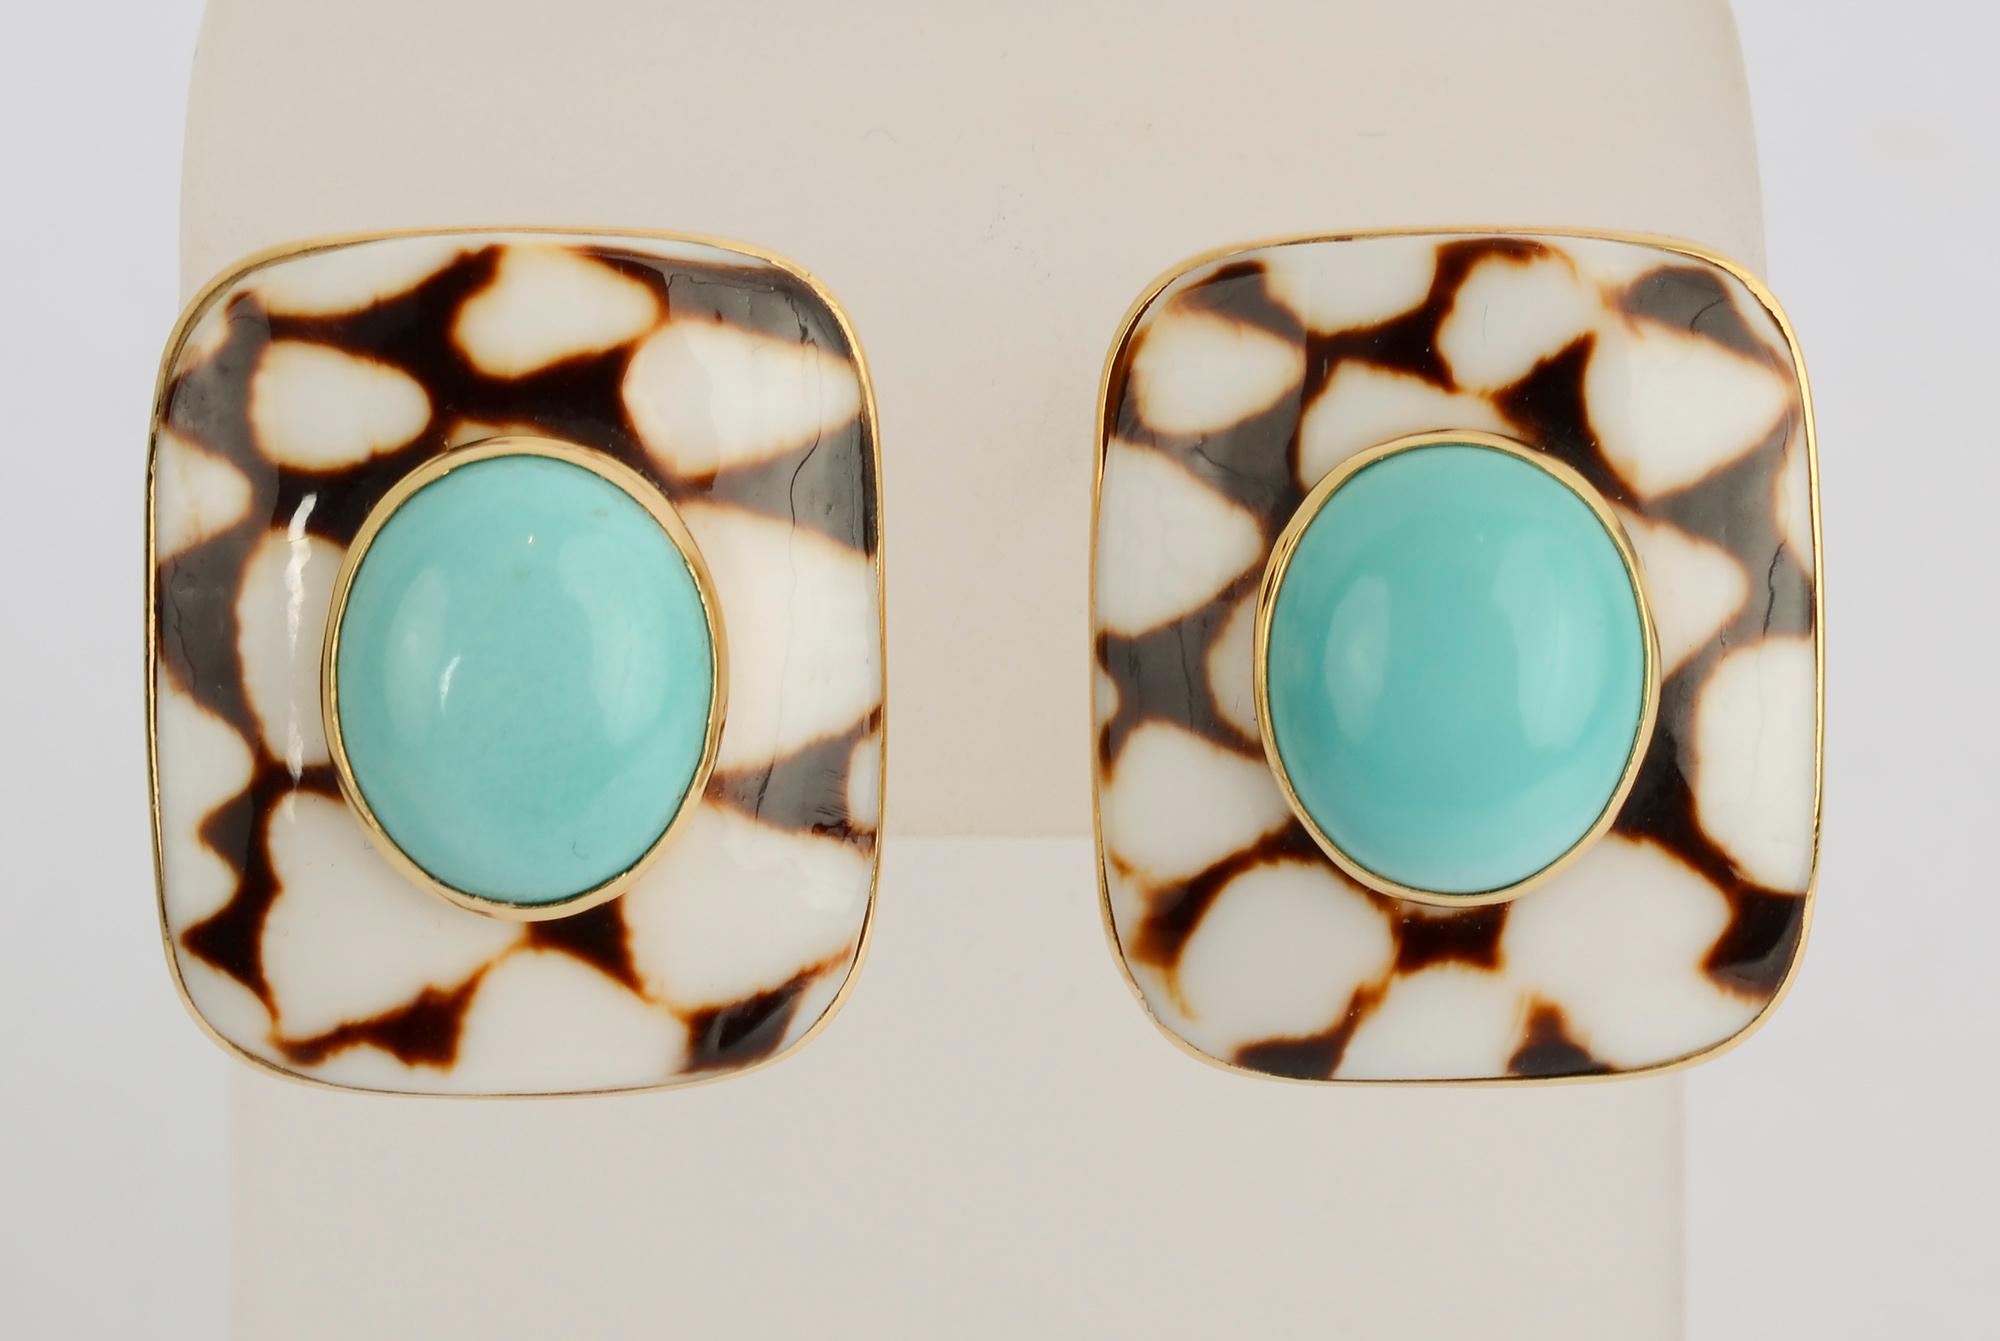 Wonderfully summery rectangular shell earrings set with turquoise made by Trianon. The dramatic dark brown and white pattern of the shell highlights the turquoise color. Clip backs can be converted to posts. Lighter color in the upper right corner